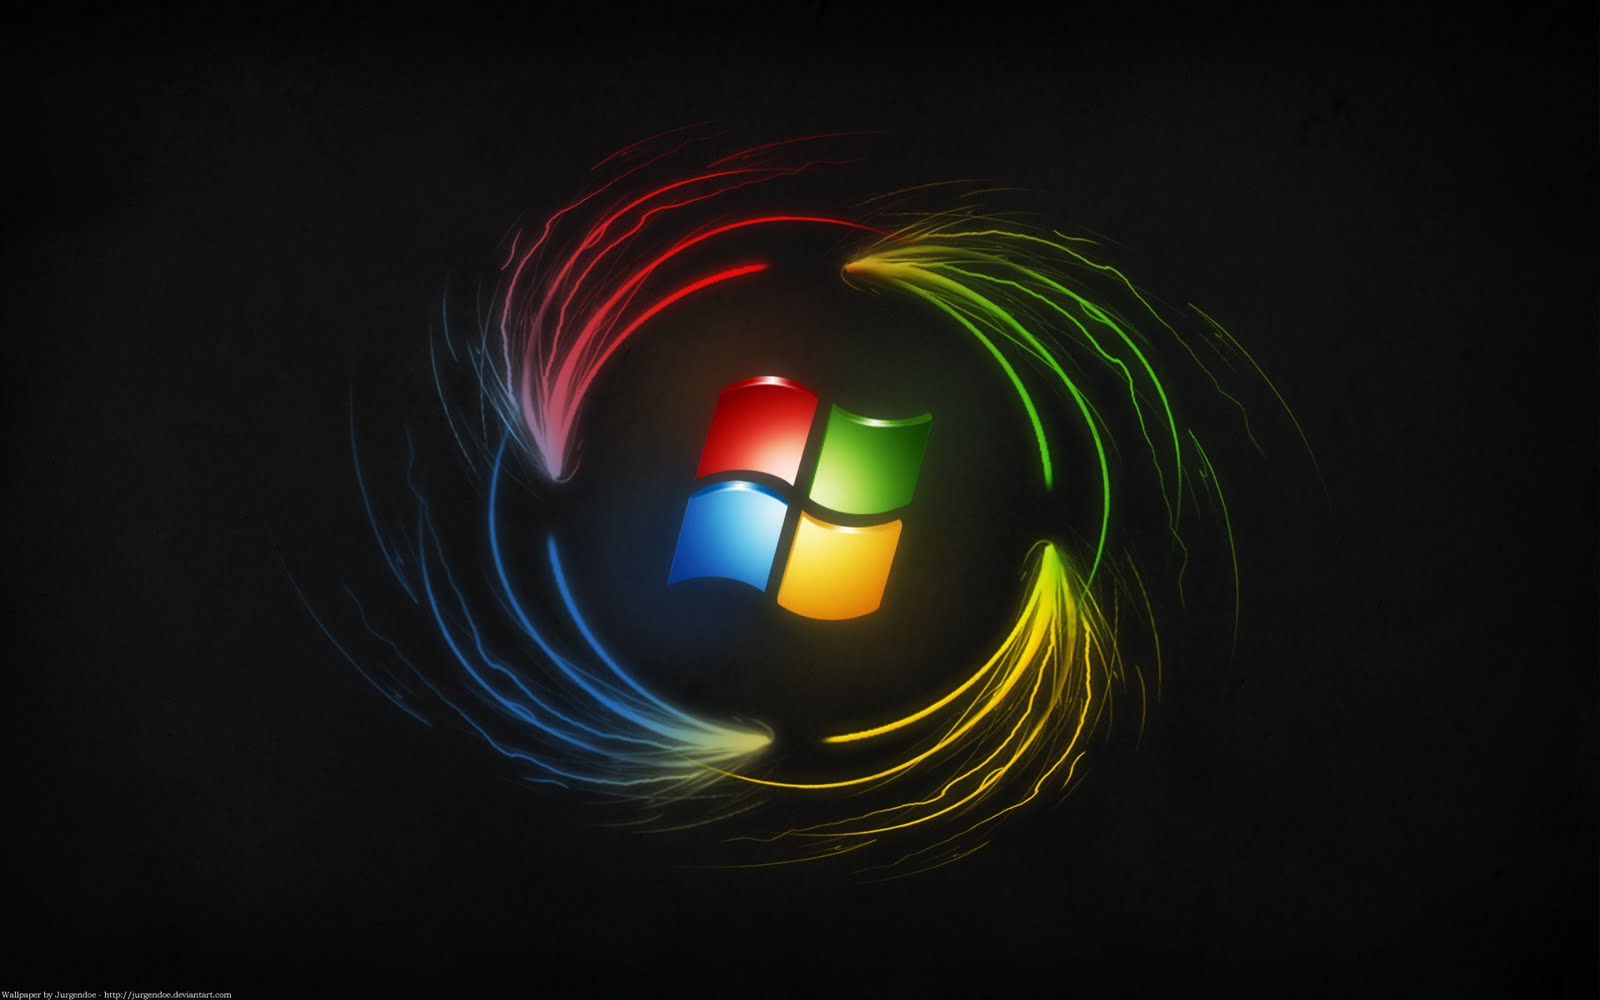 Free Windows 8 Wallpapers Group (91+)